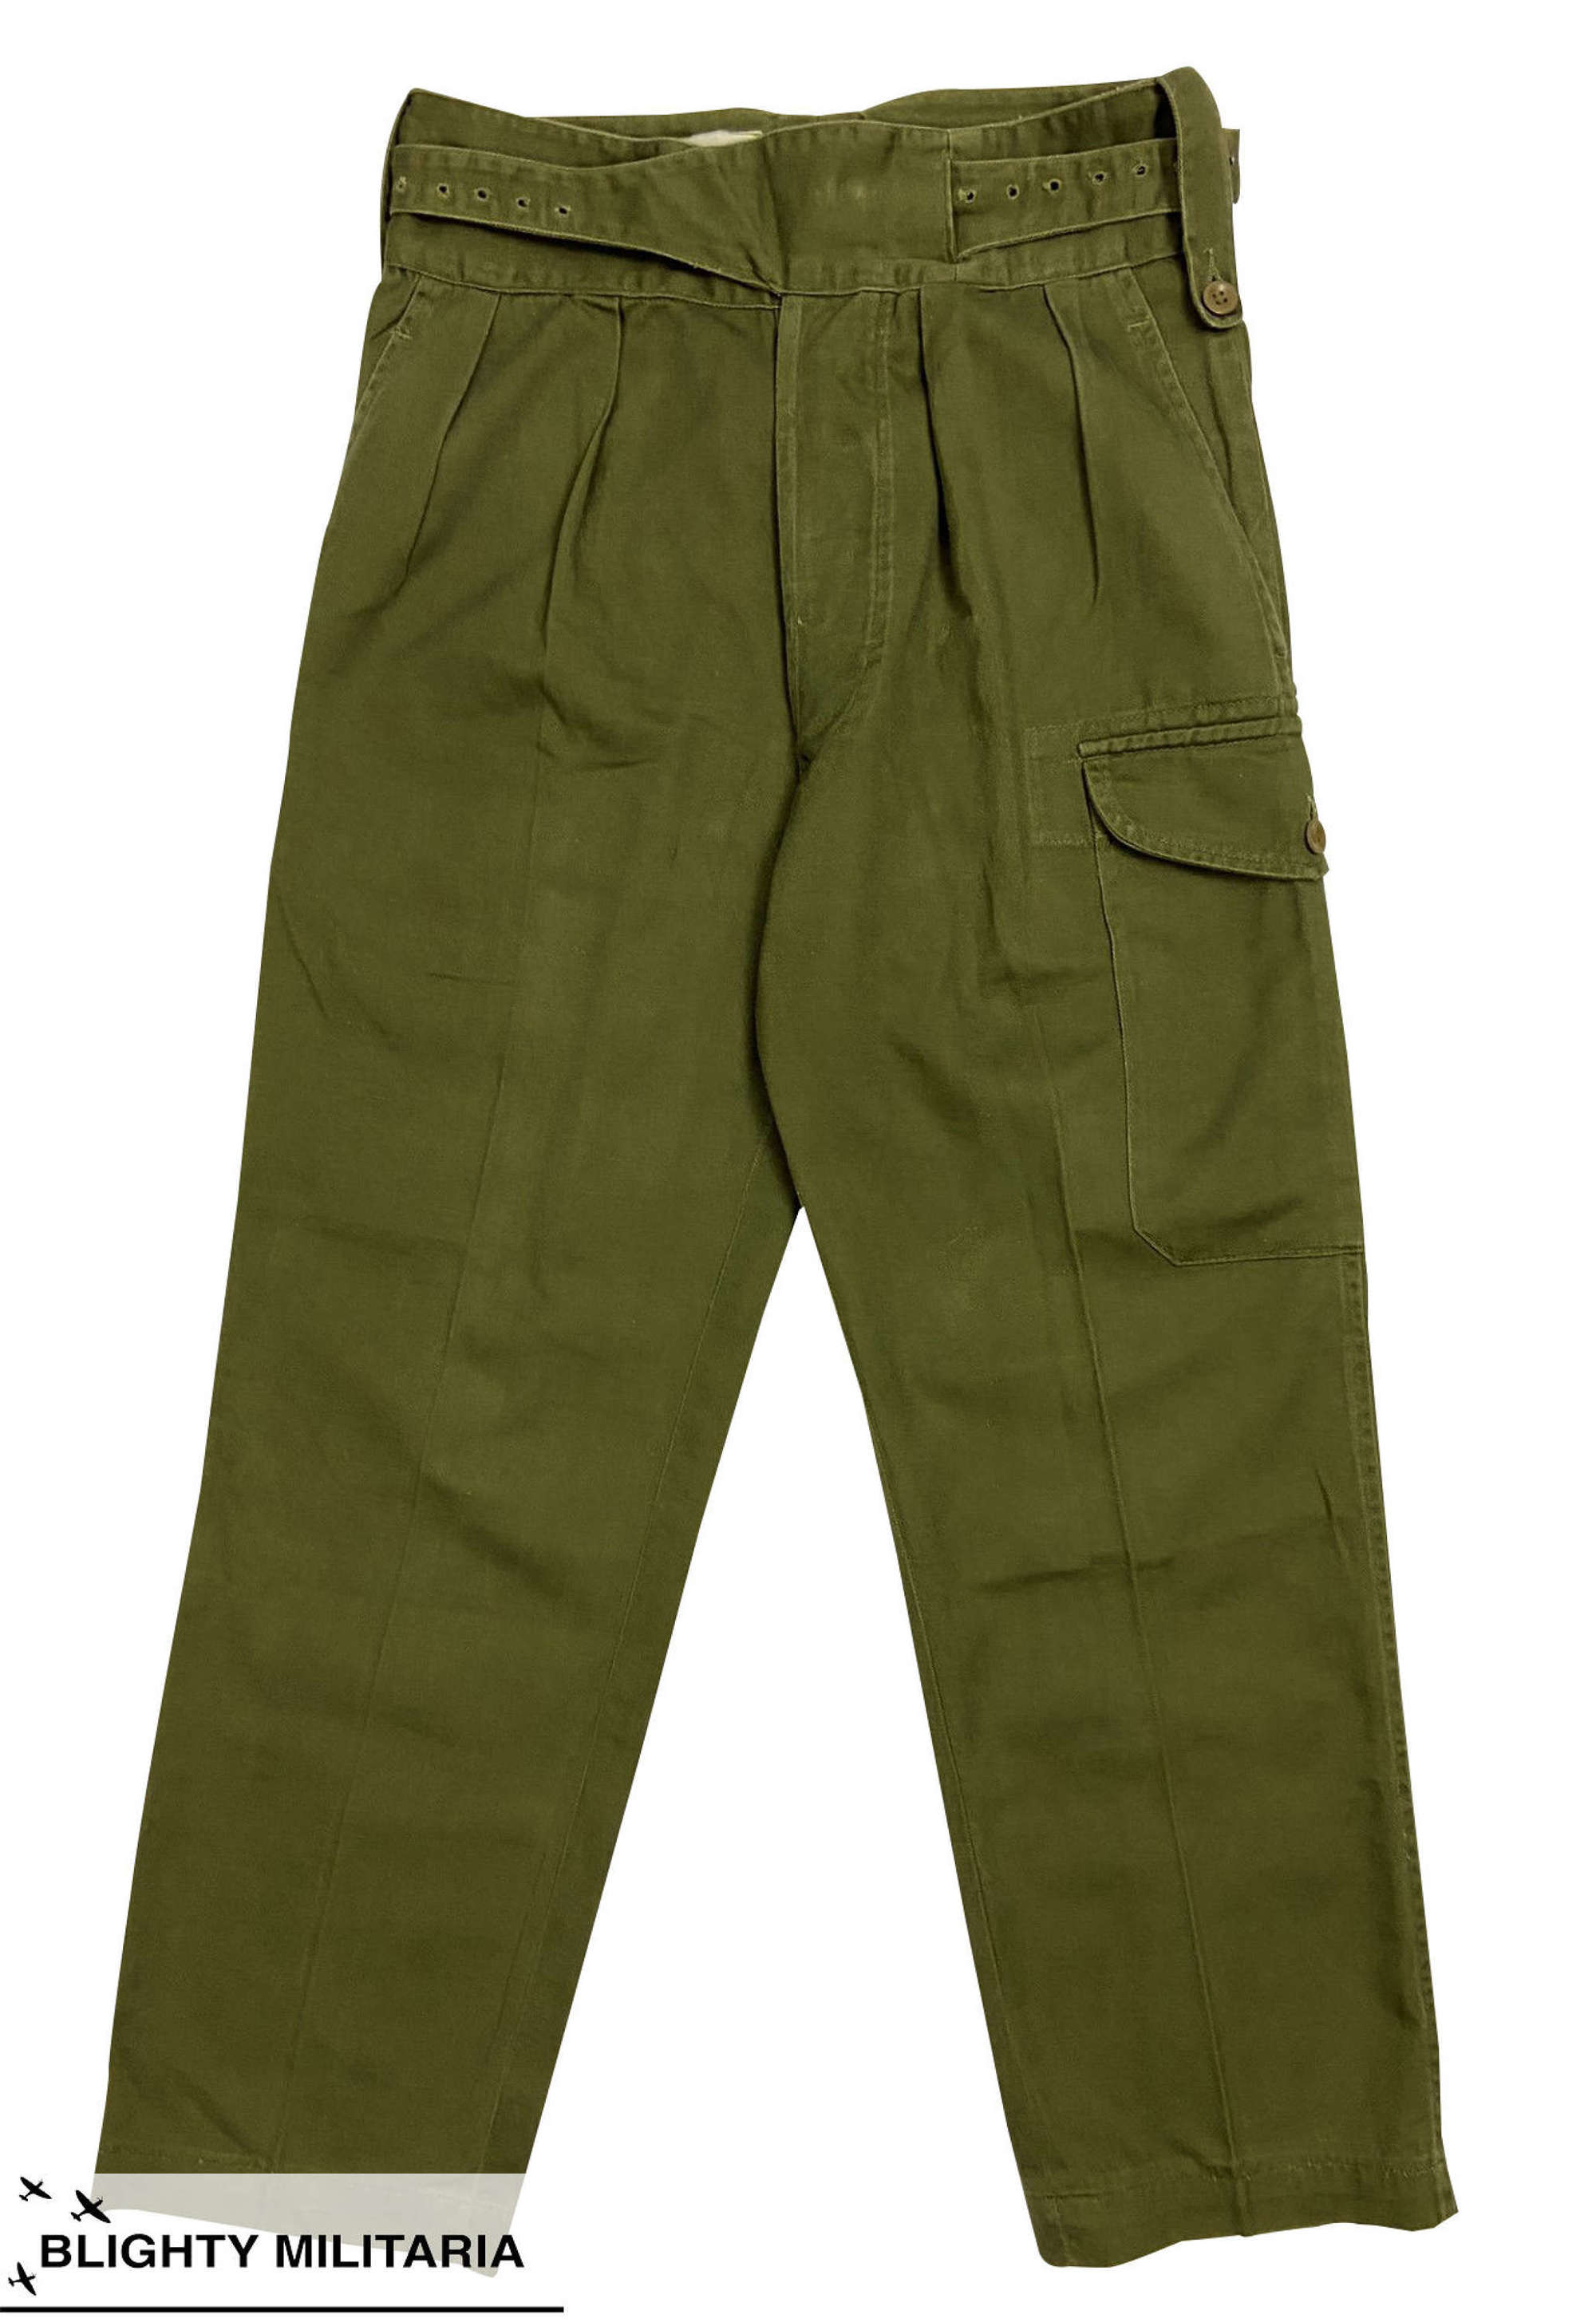 Original 1971 Dated 1960 Pattern Drill Green Trousers